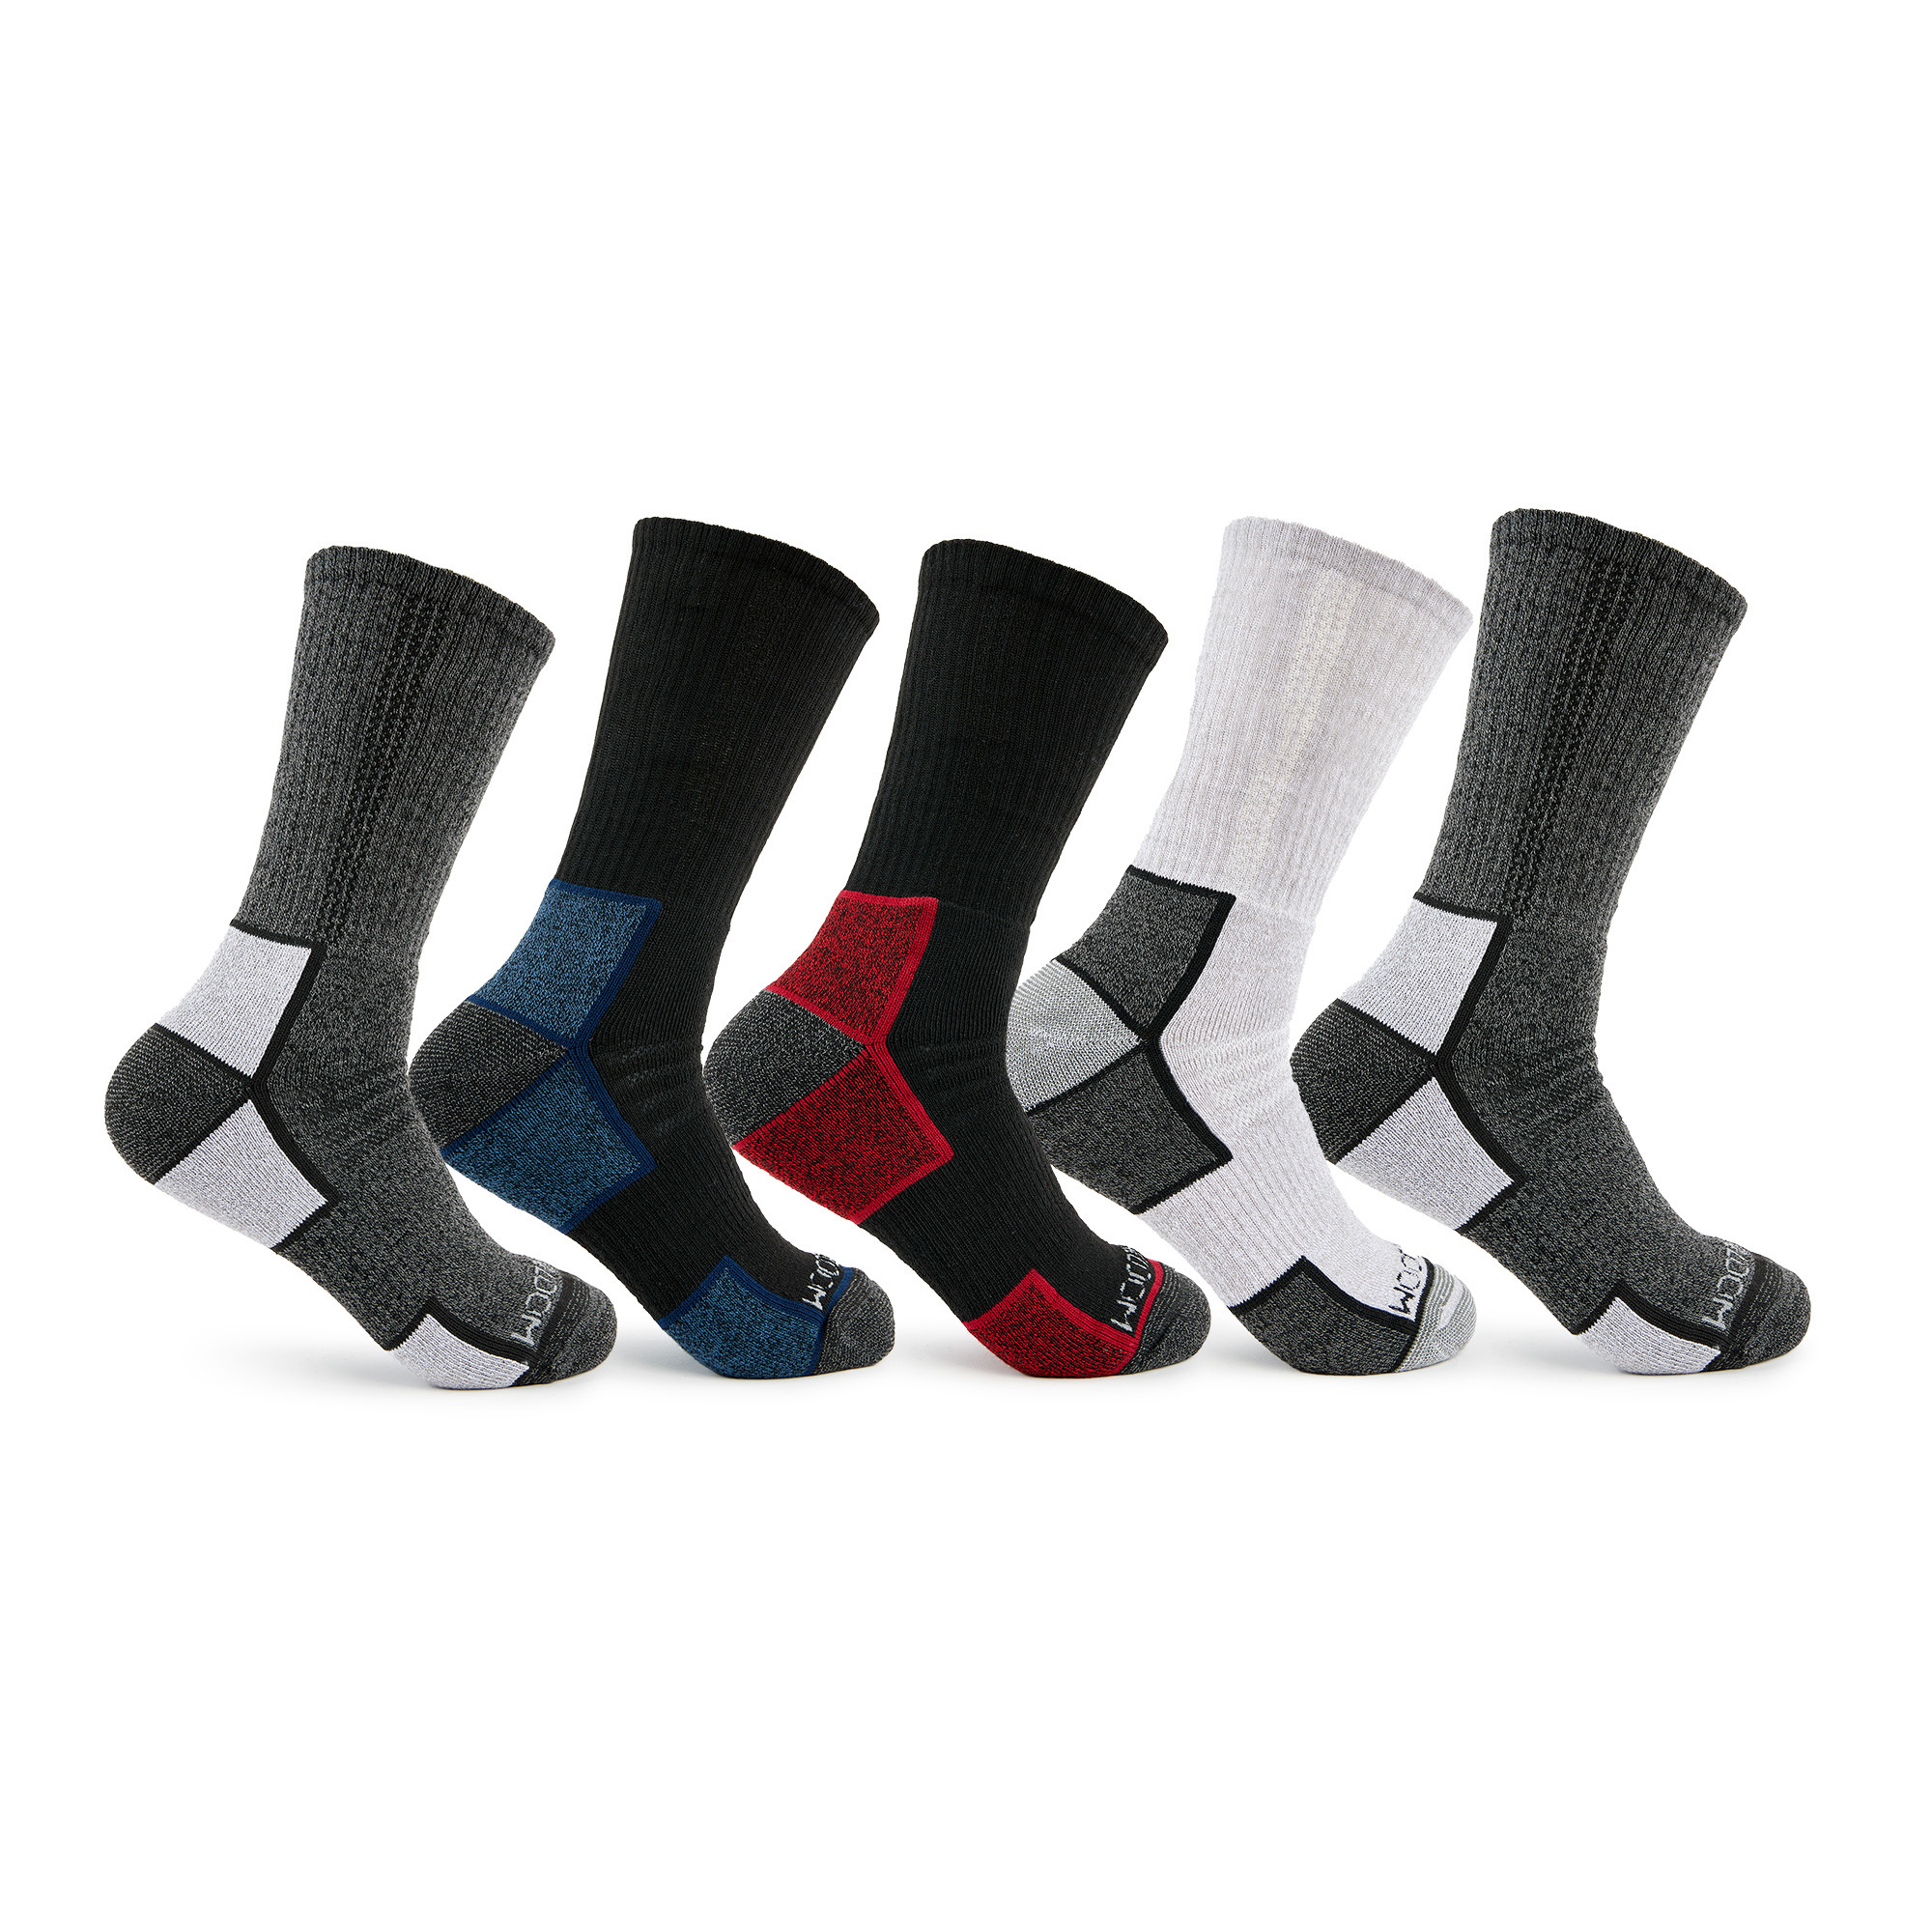 Fruit of the Loom, MENS WORK GEAR CREW SOCK 5 PAIR PACK, Size M, Pairs (qty.) 5, Color Assorted, Model FRM10650C